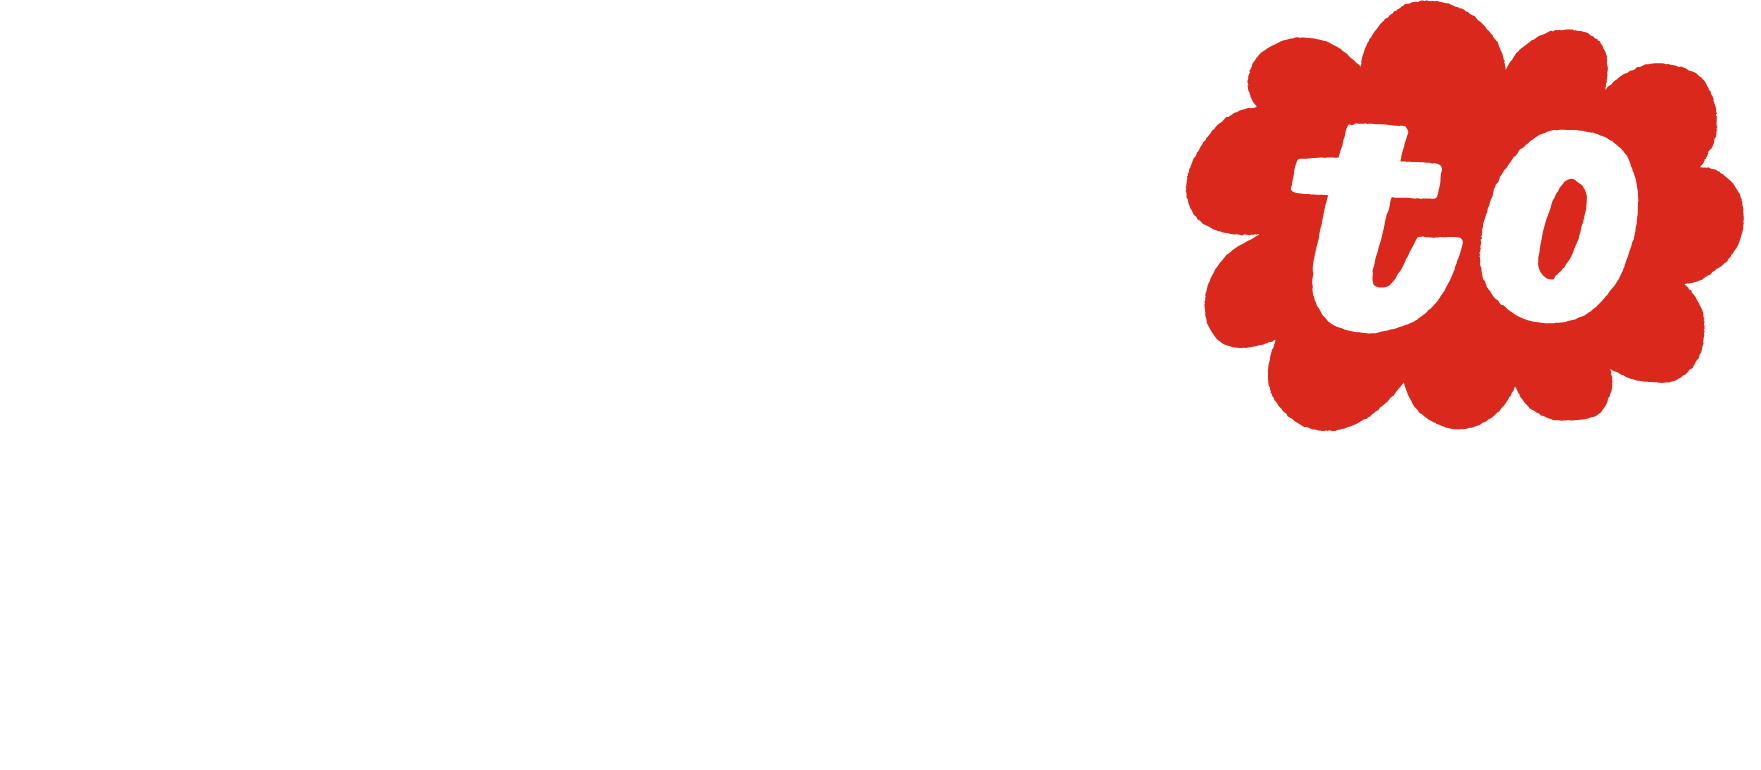 ways-to-give-back